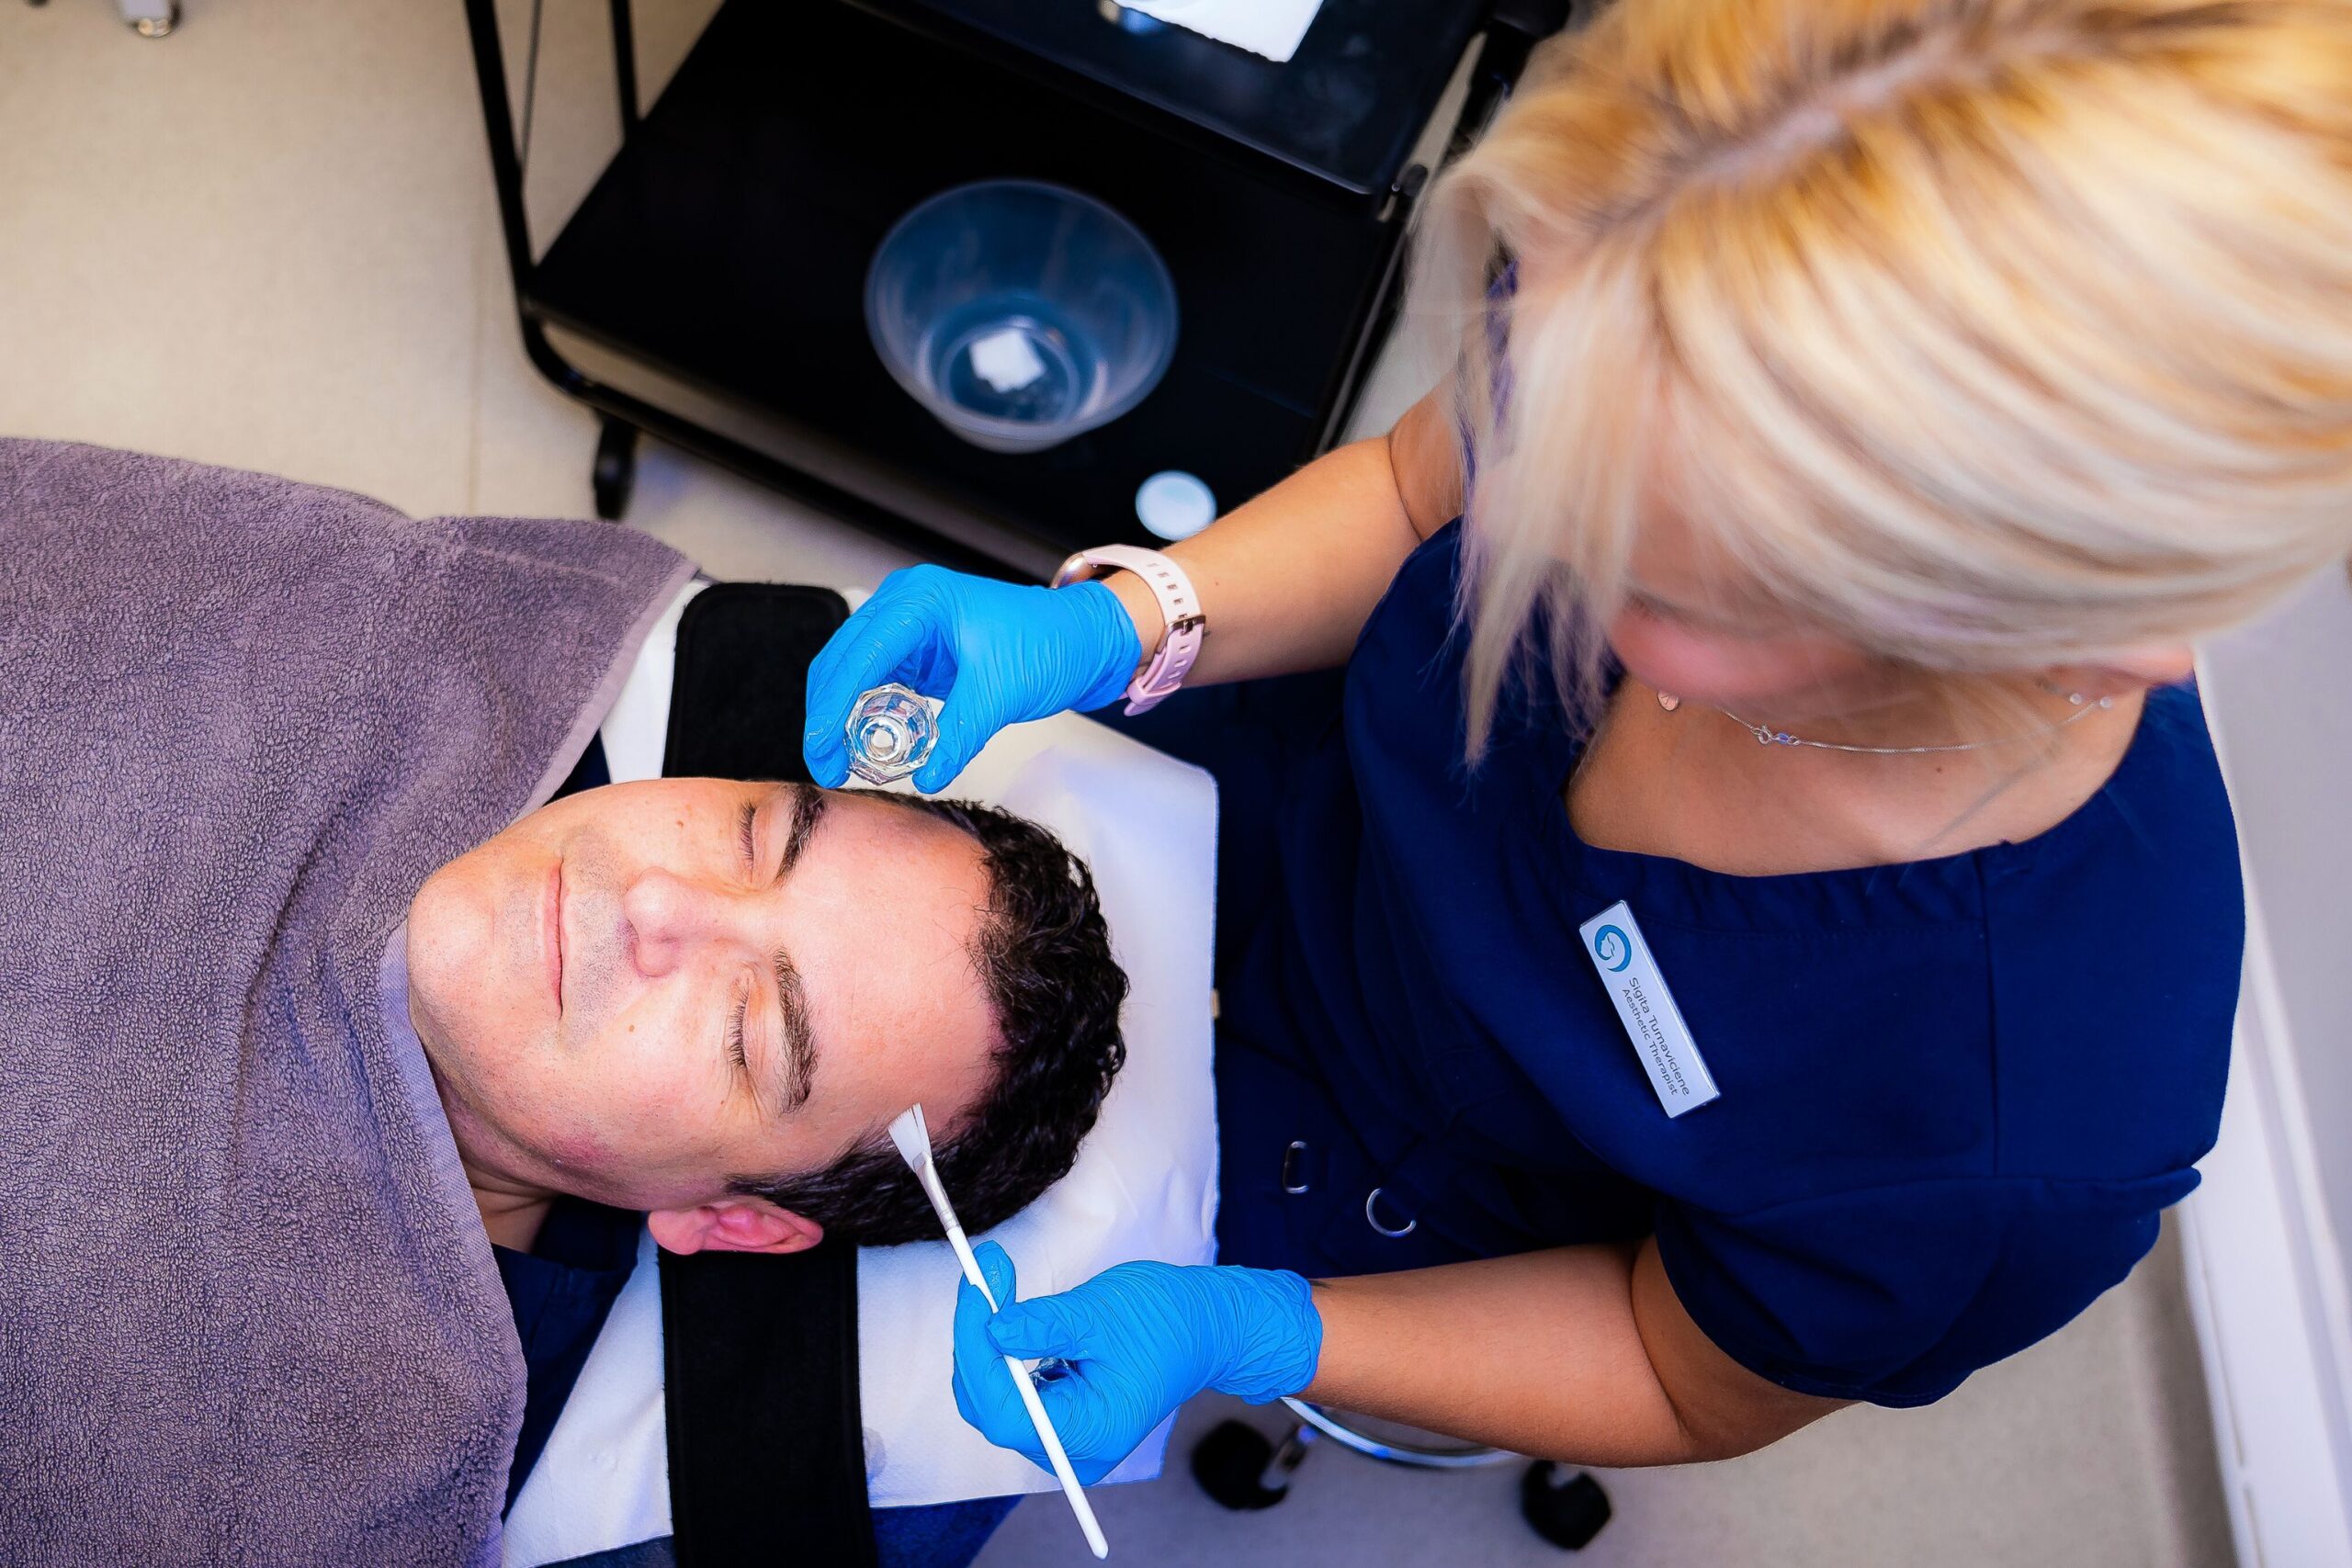 Chemical peels for acne scars at Freyja Medical in Wrexham, Nantwich and Cheshire